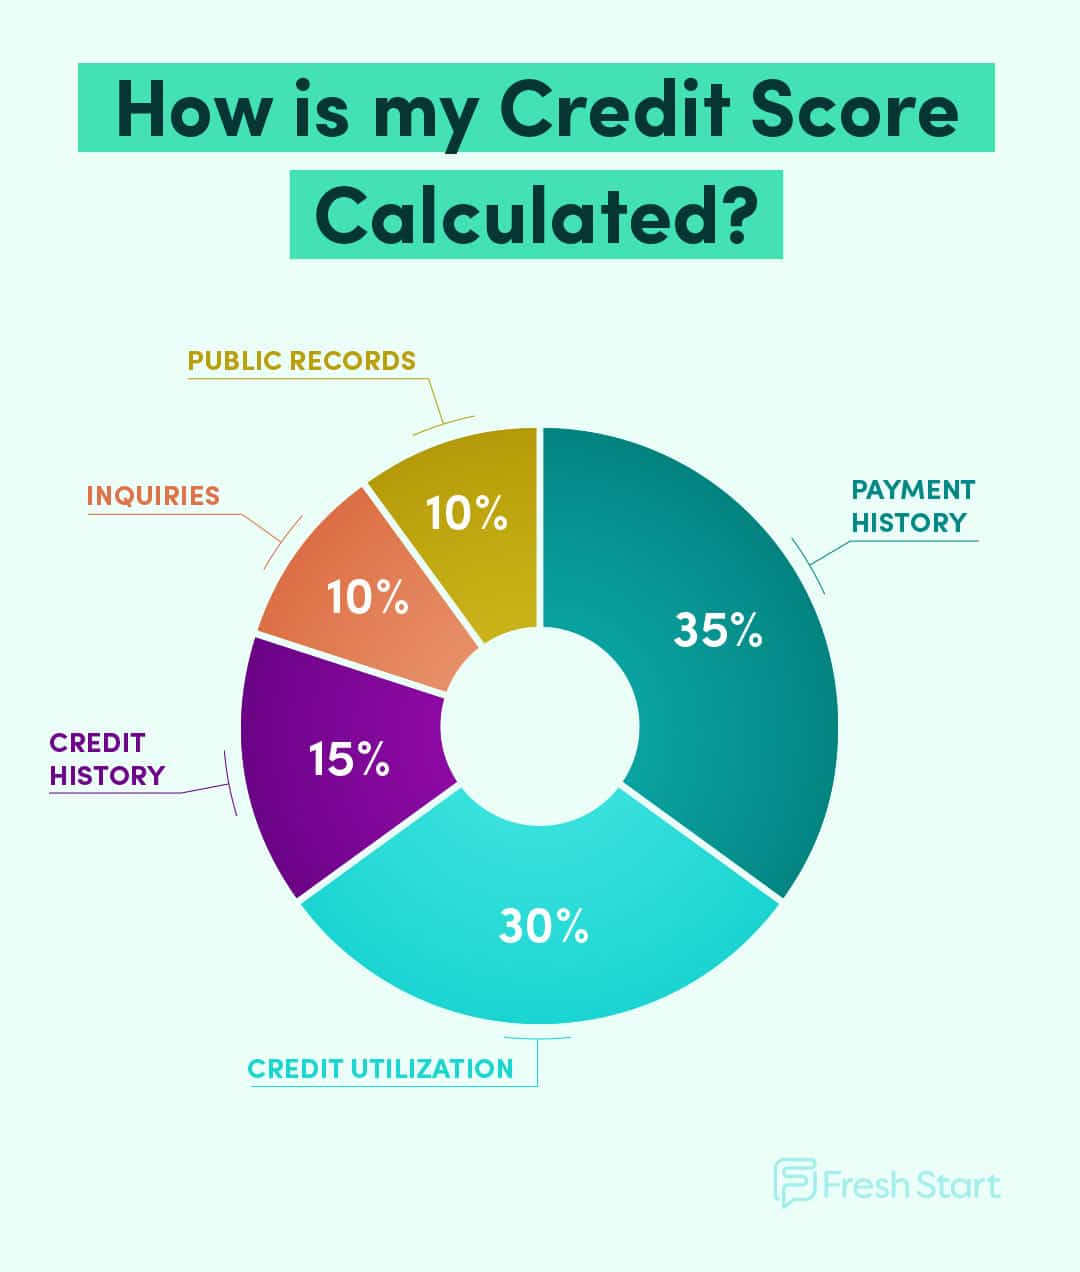 Whats the Minimum Credit Score Needed for a Personal Loan?